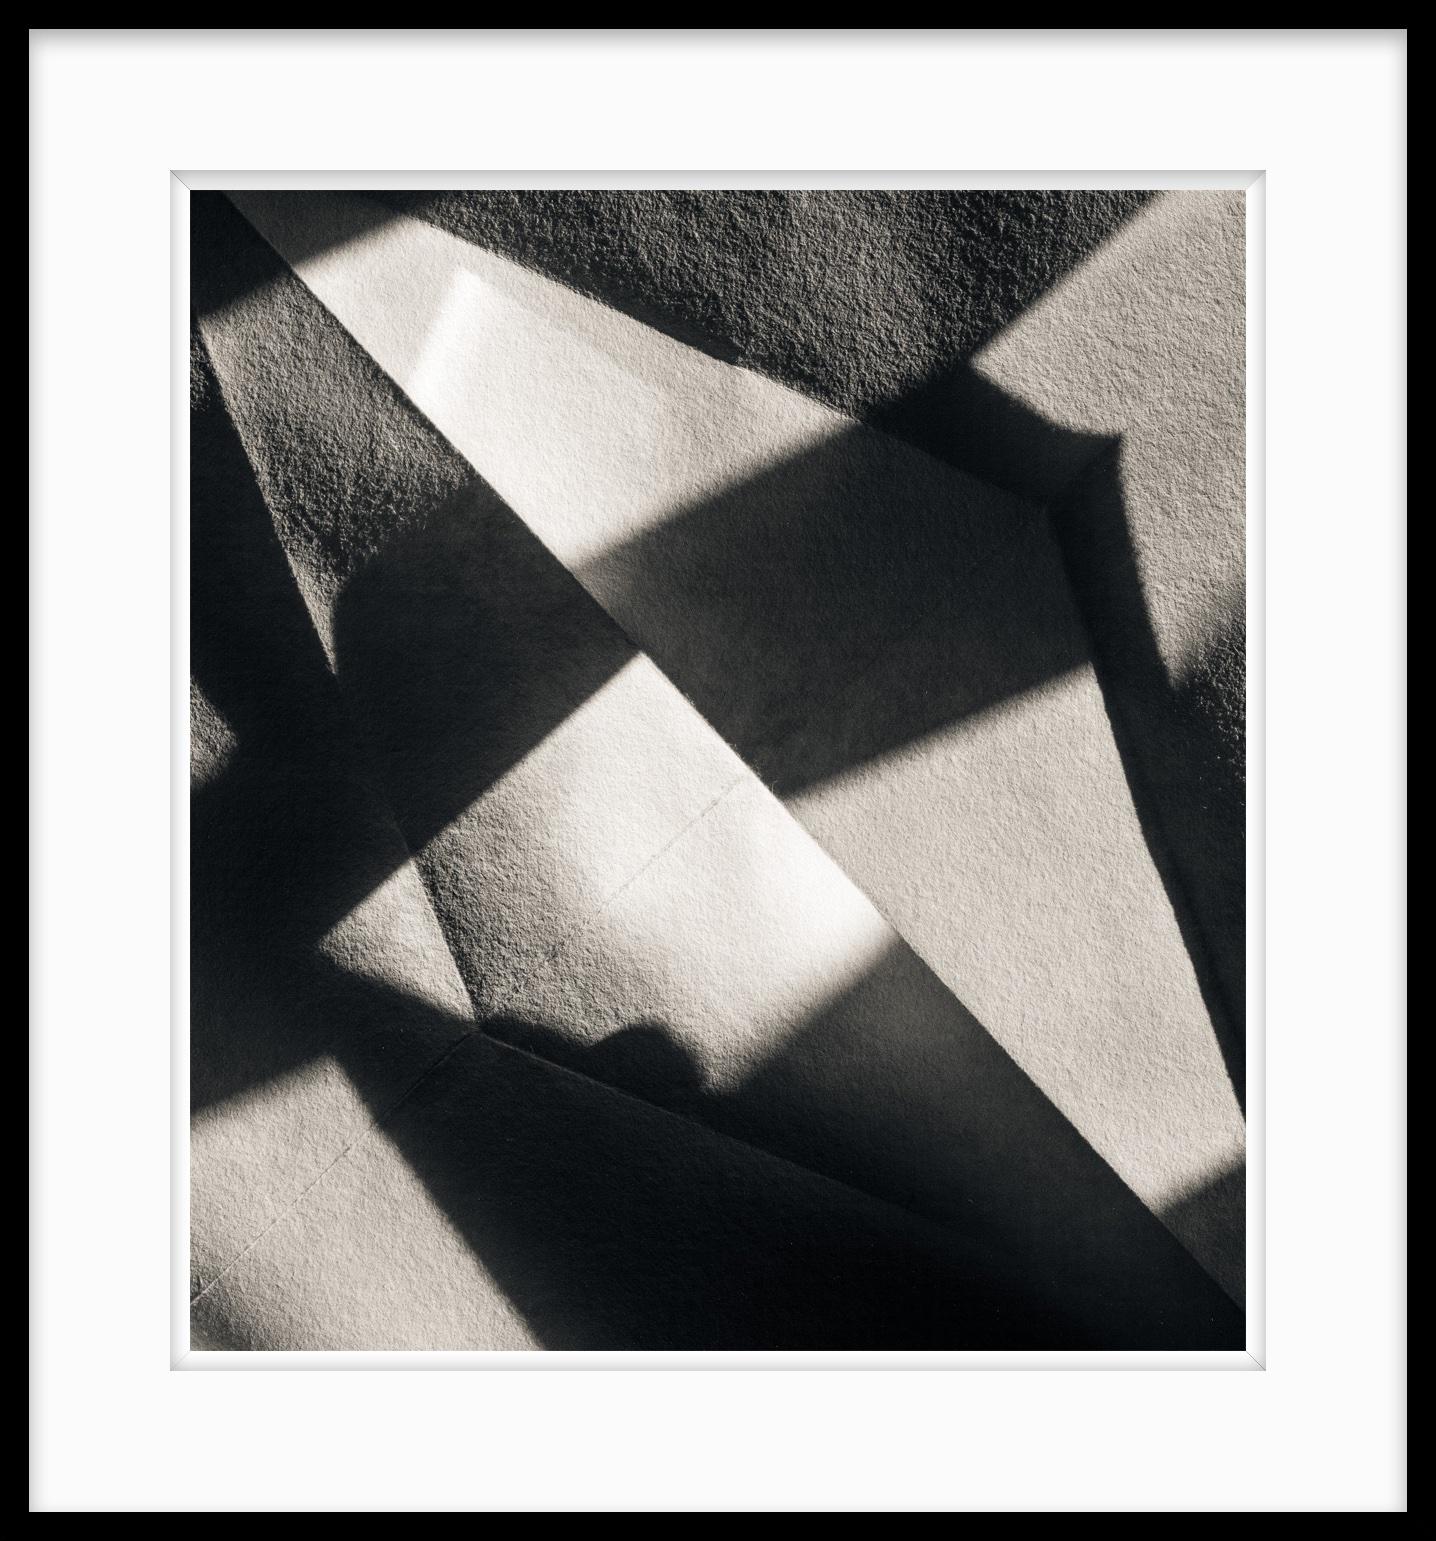  Limited Edition Abstract Black and White Photograph  - Origami Folds #15  This image from the Origami Folds series has been in several museum exhibitions and corporate collections.

Astrophysicist Koryo Miura created the unfolding solar panels for